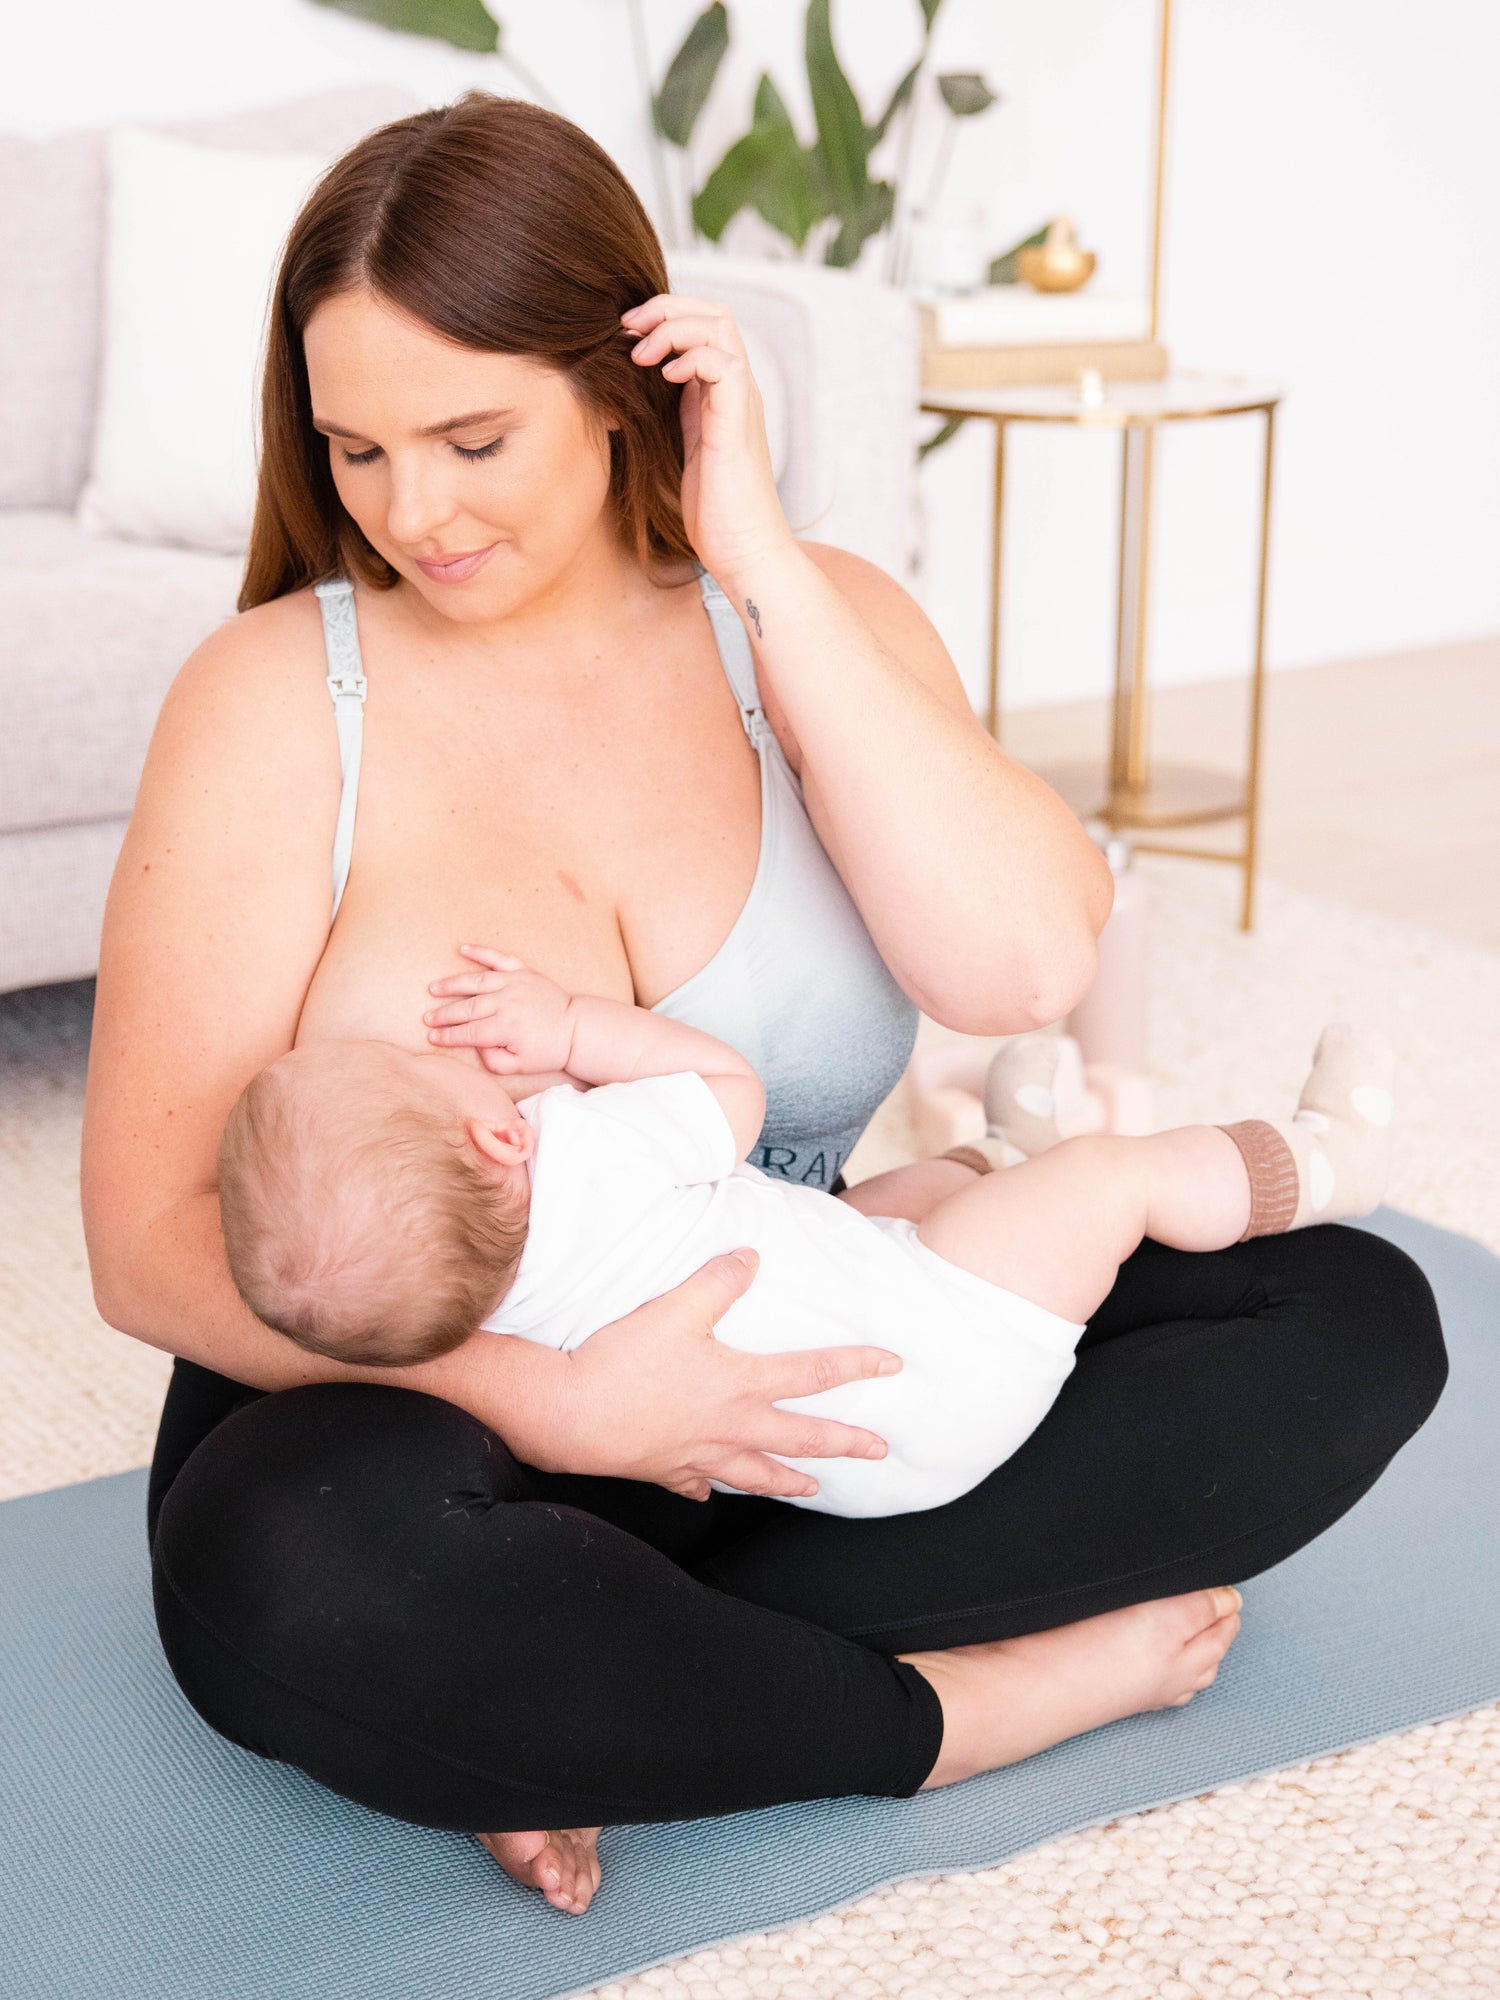 The mother of all maternity bras, Maternity wear